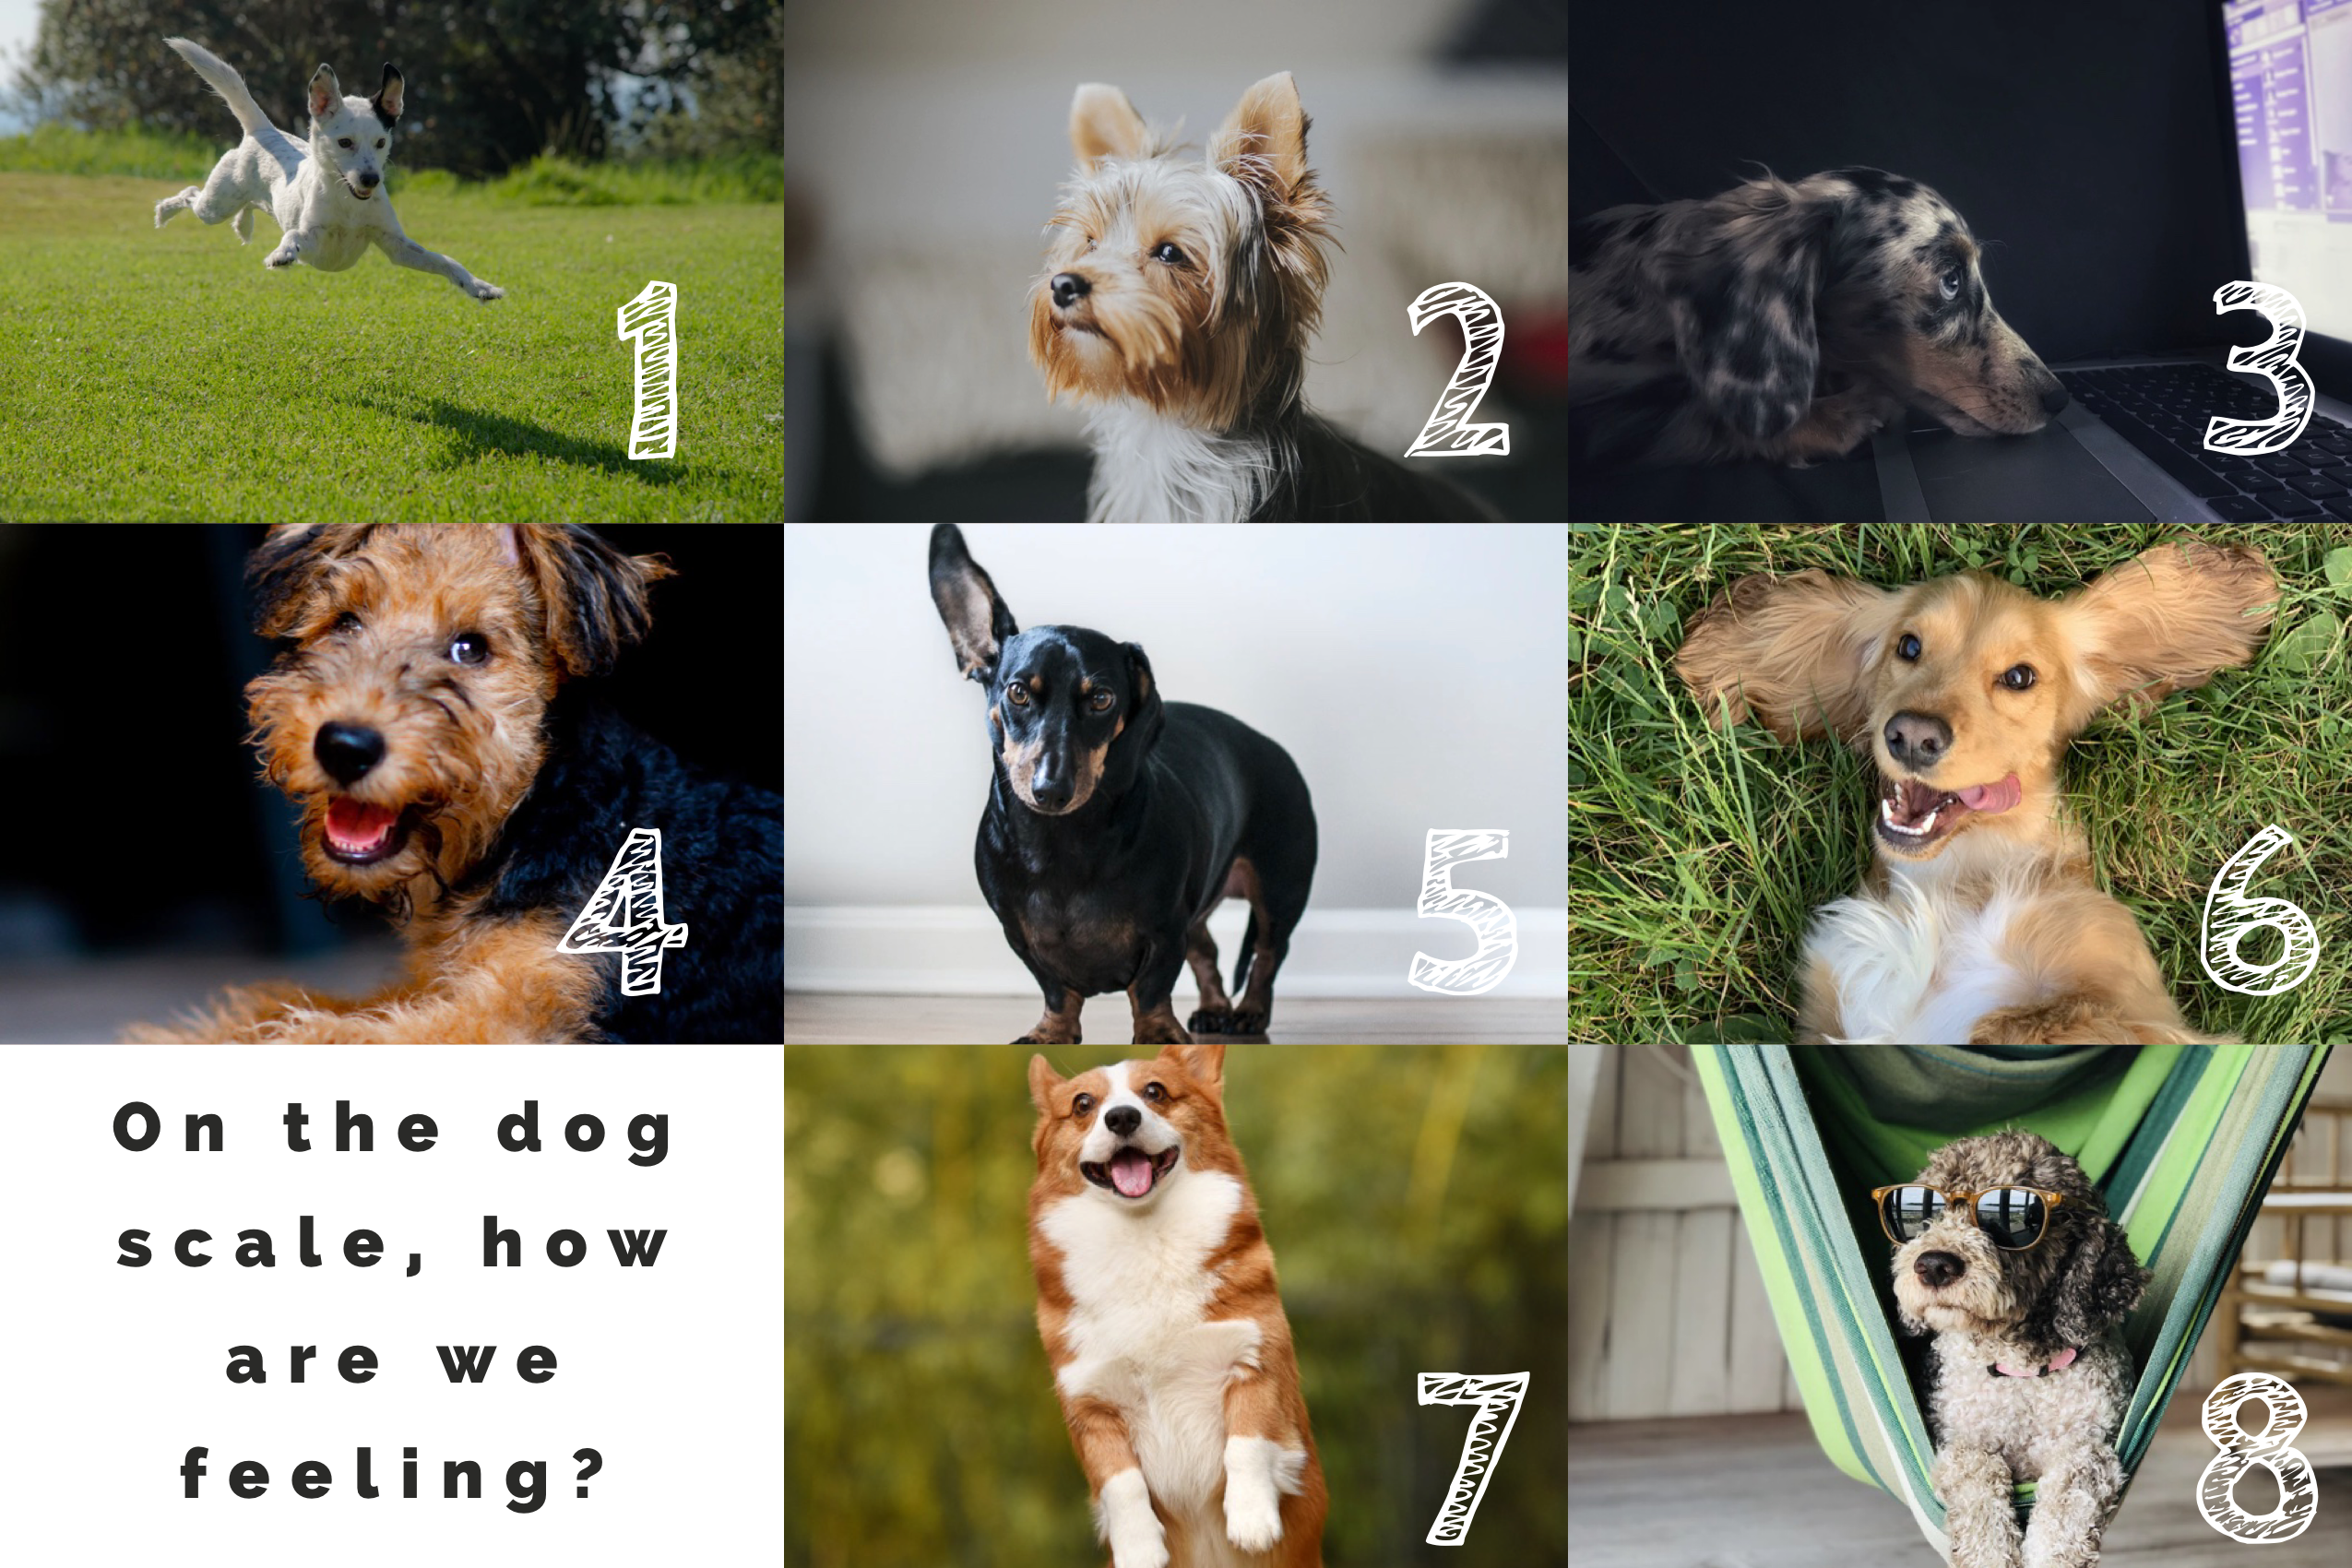 On A Dog Scale, How Are You Feeling?, by Violet May